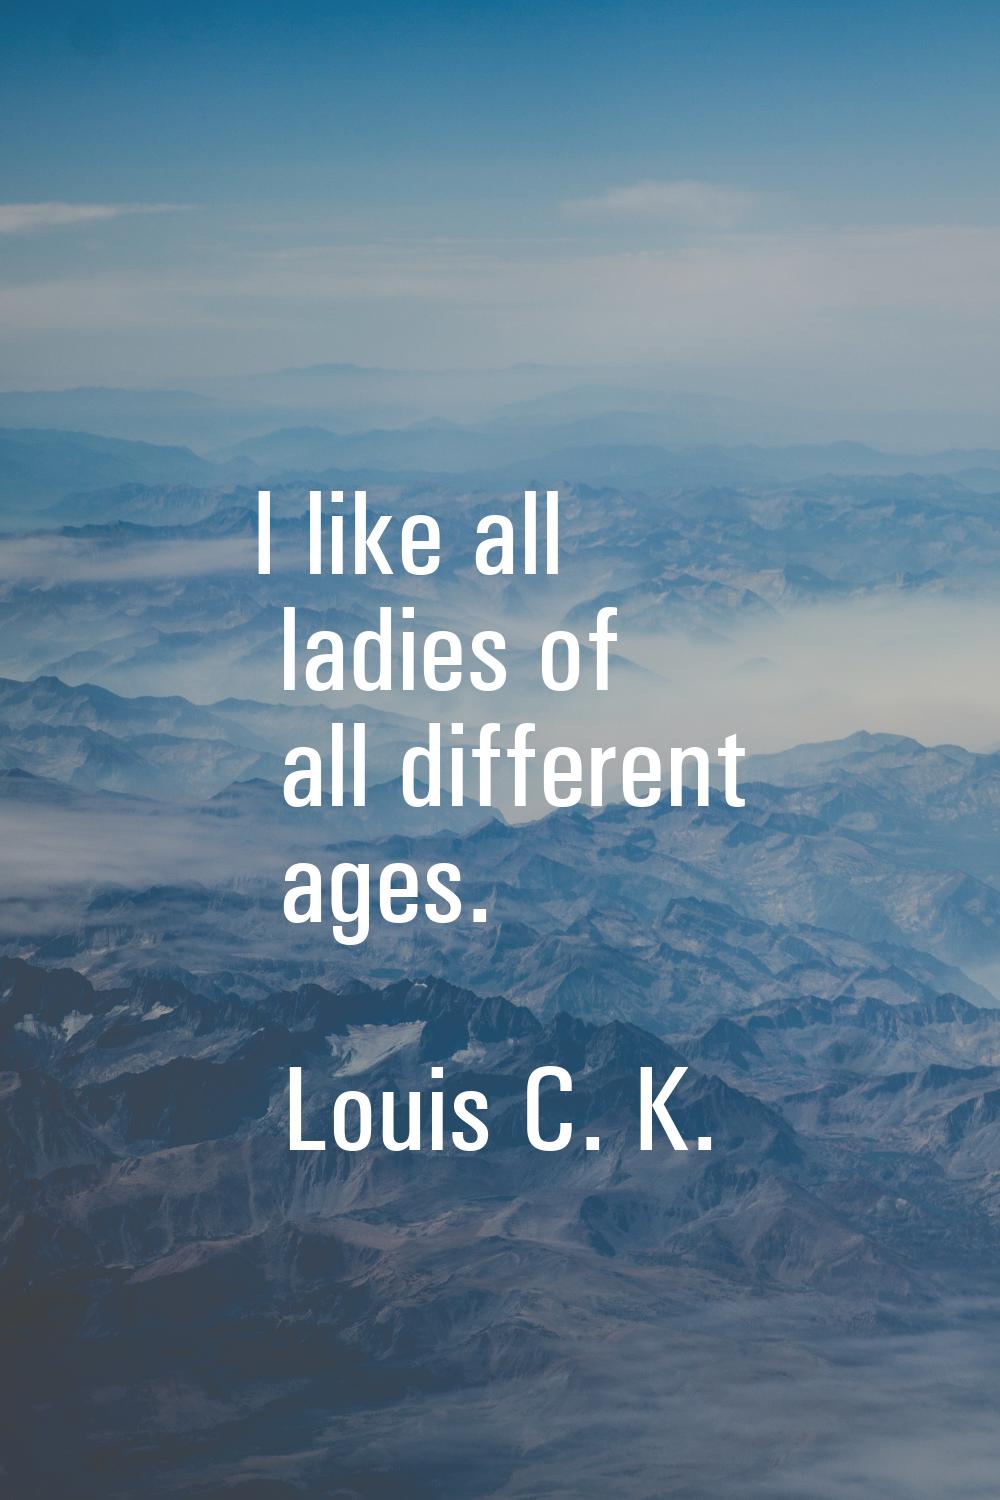 I like all ladies of all different ages.